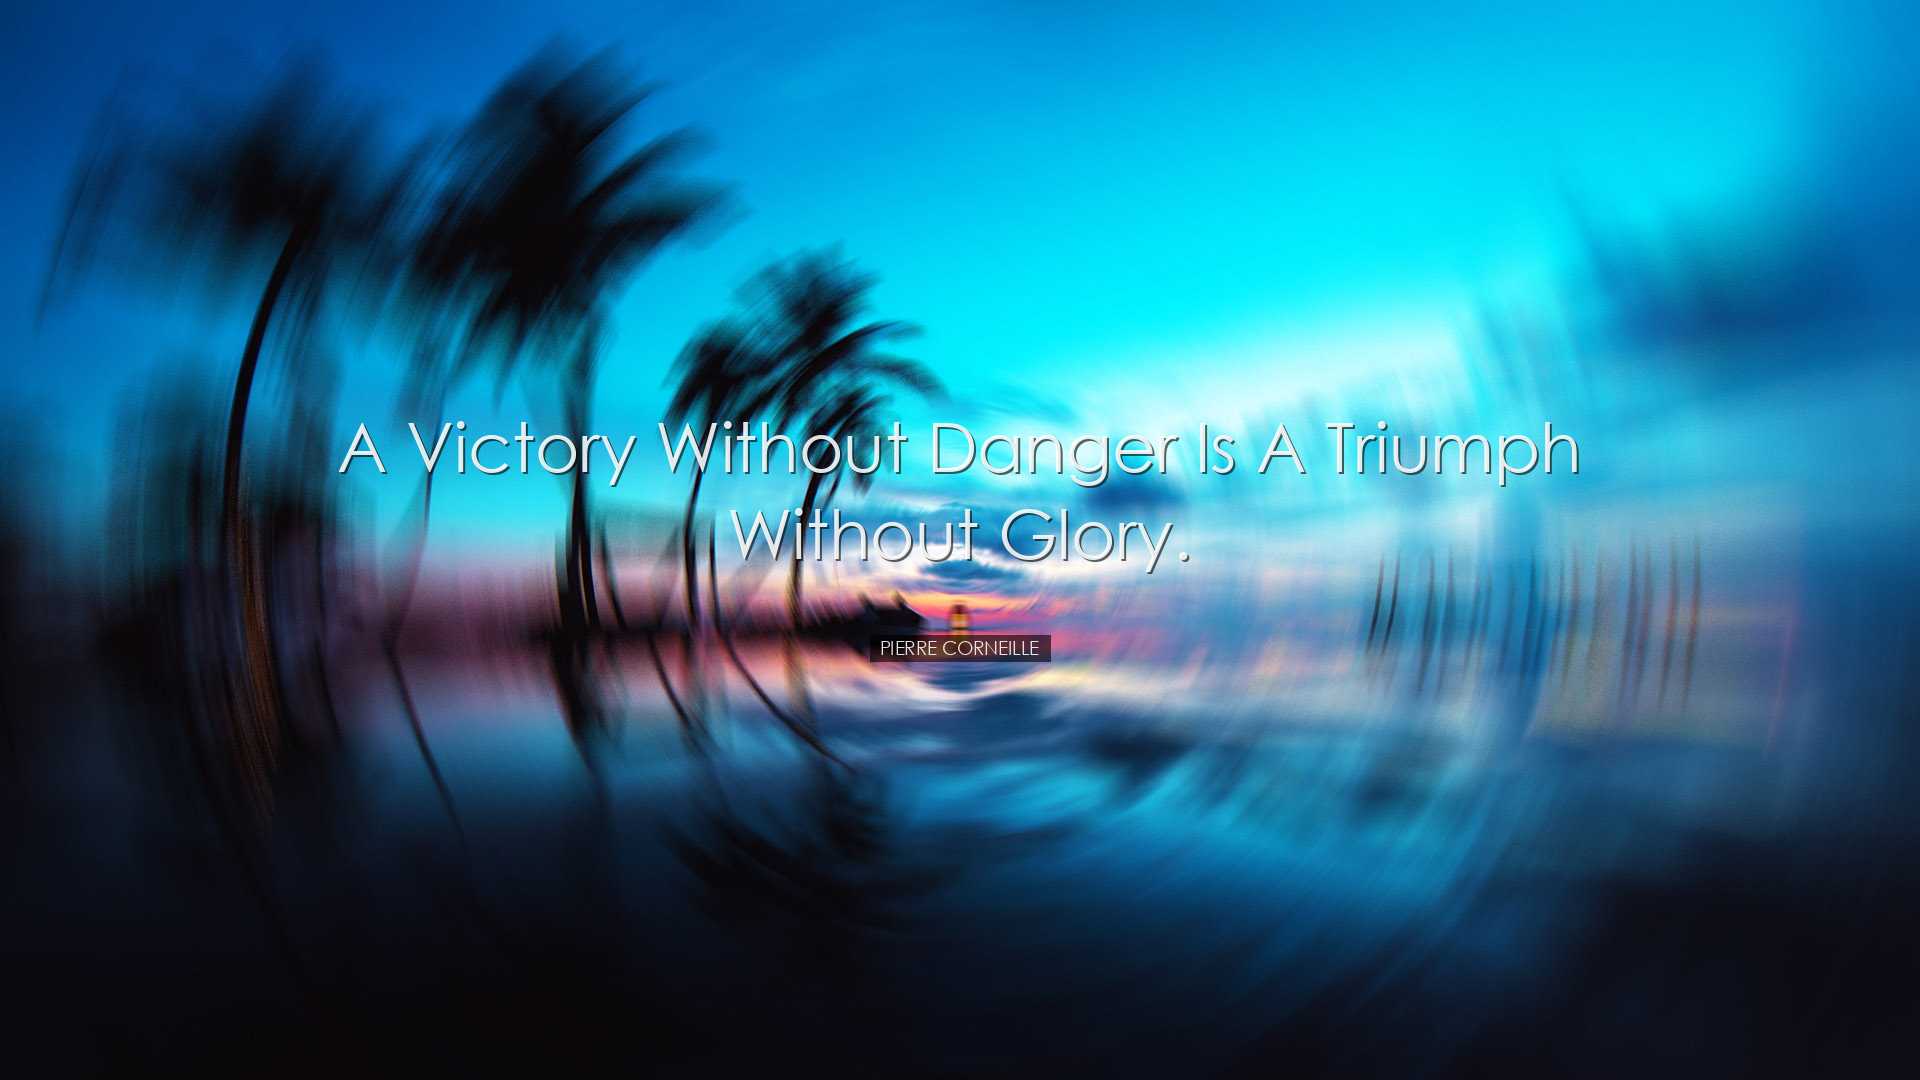 A Victory without danger is a triumph without glory. - Pierre Corn